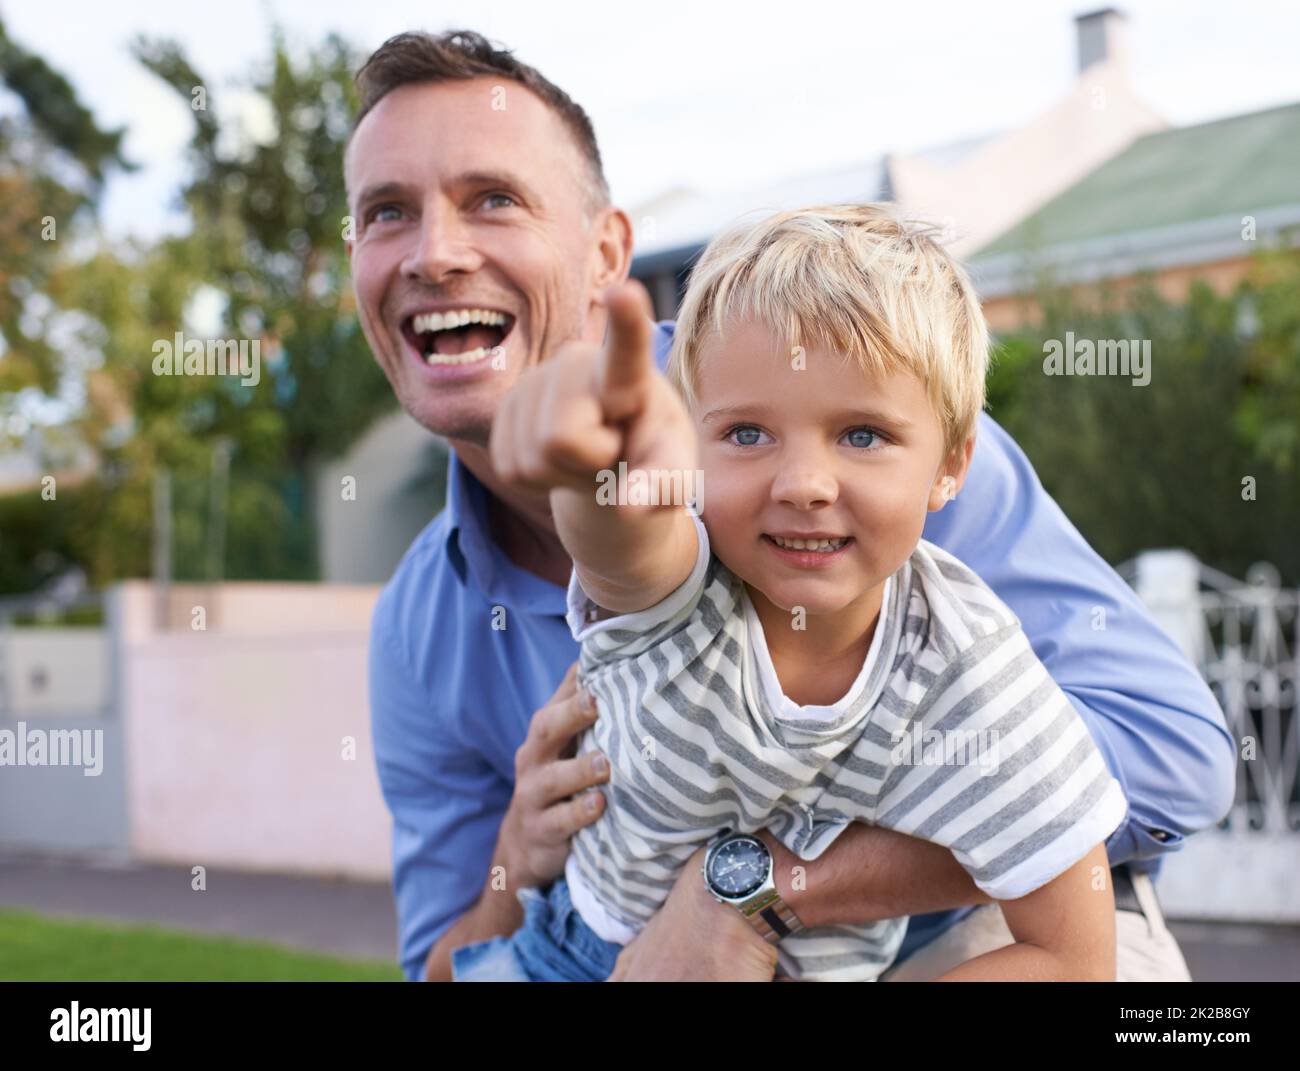 Enjoying time as a family. A father playing with his child. Stock Photo